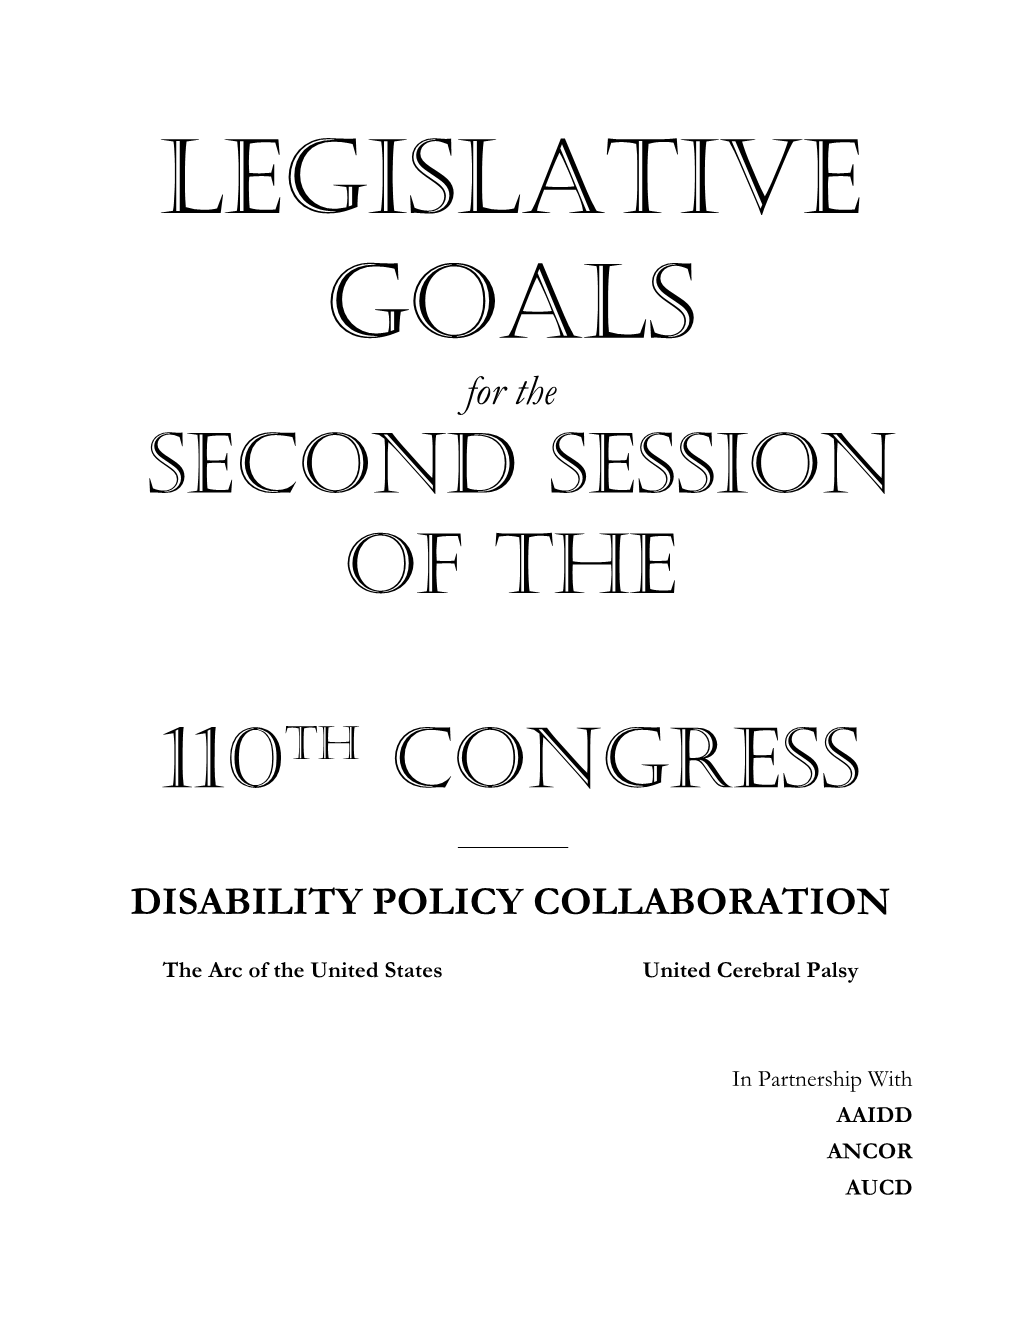 LEGISLATIVE GOALS for the SECOND SESSION of THE